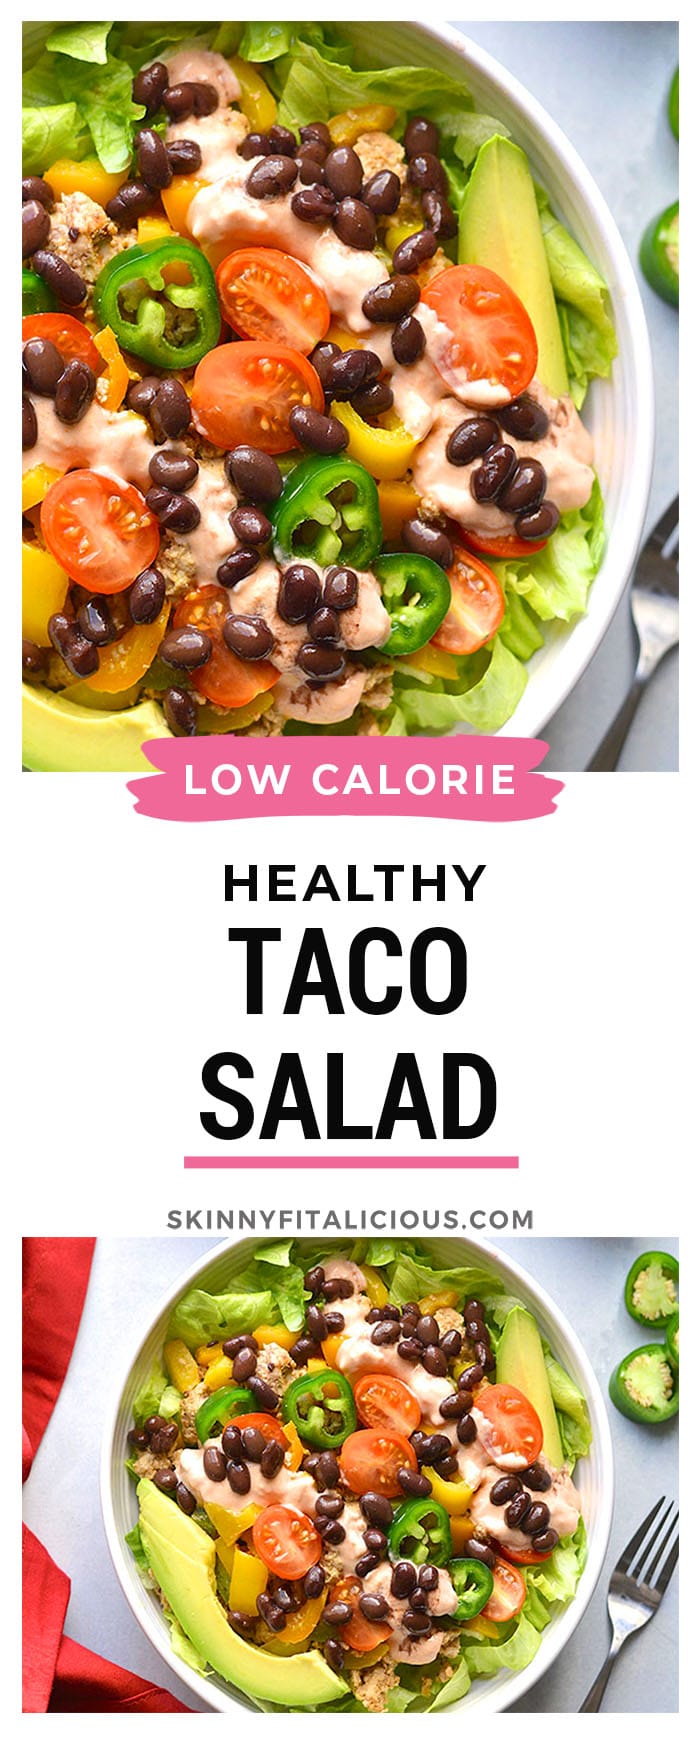 This Healthy Taco Salad is a low calorie meal packed with veggies, ground turkey, black beans and topped with a Greek yogurt salsa dressing. A super simple meal that's filling, high in protein and fiber to keep cravings away.